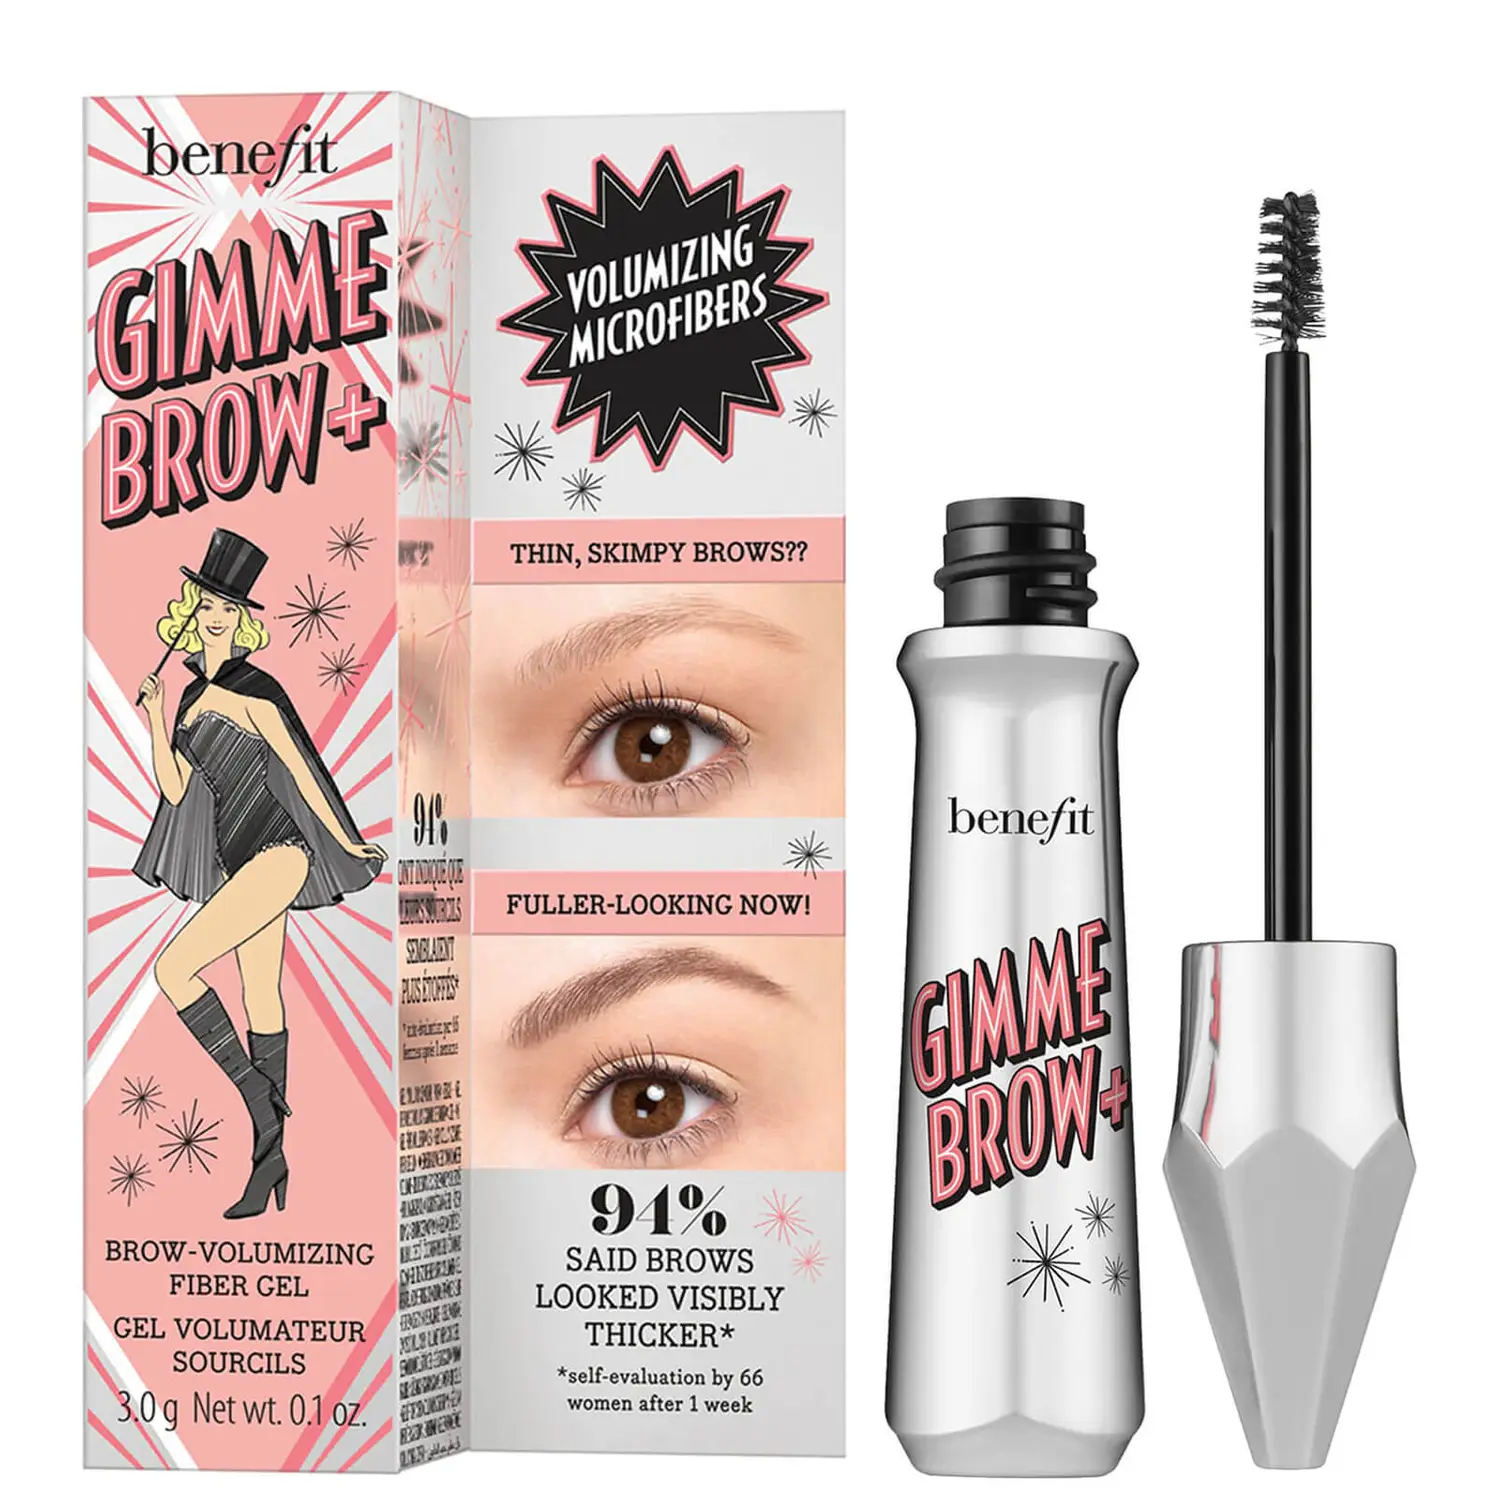 BENEFIT GIMME BROW+ GEL 3G (VARIOUS SHADES) £23.50